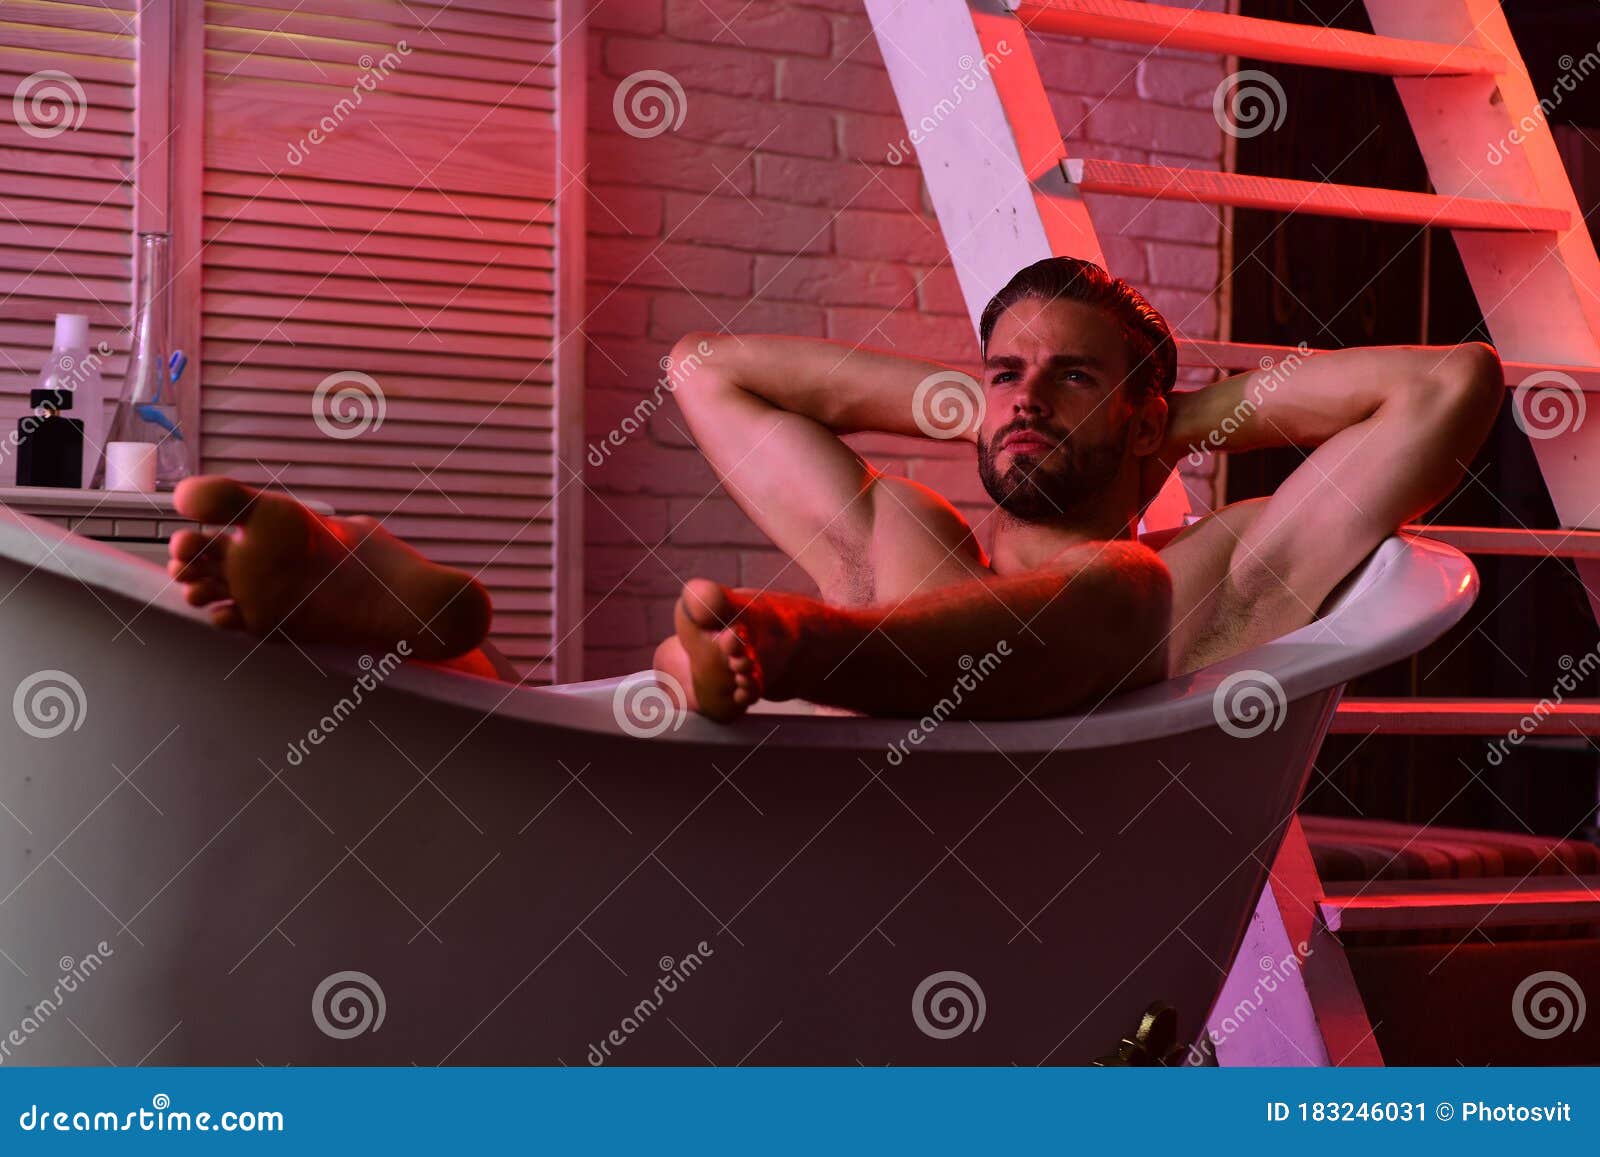 erotica concept: macho sitting in bathtub with red lights on